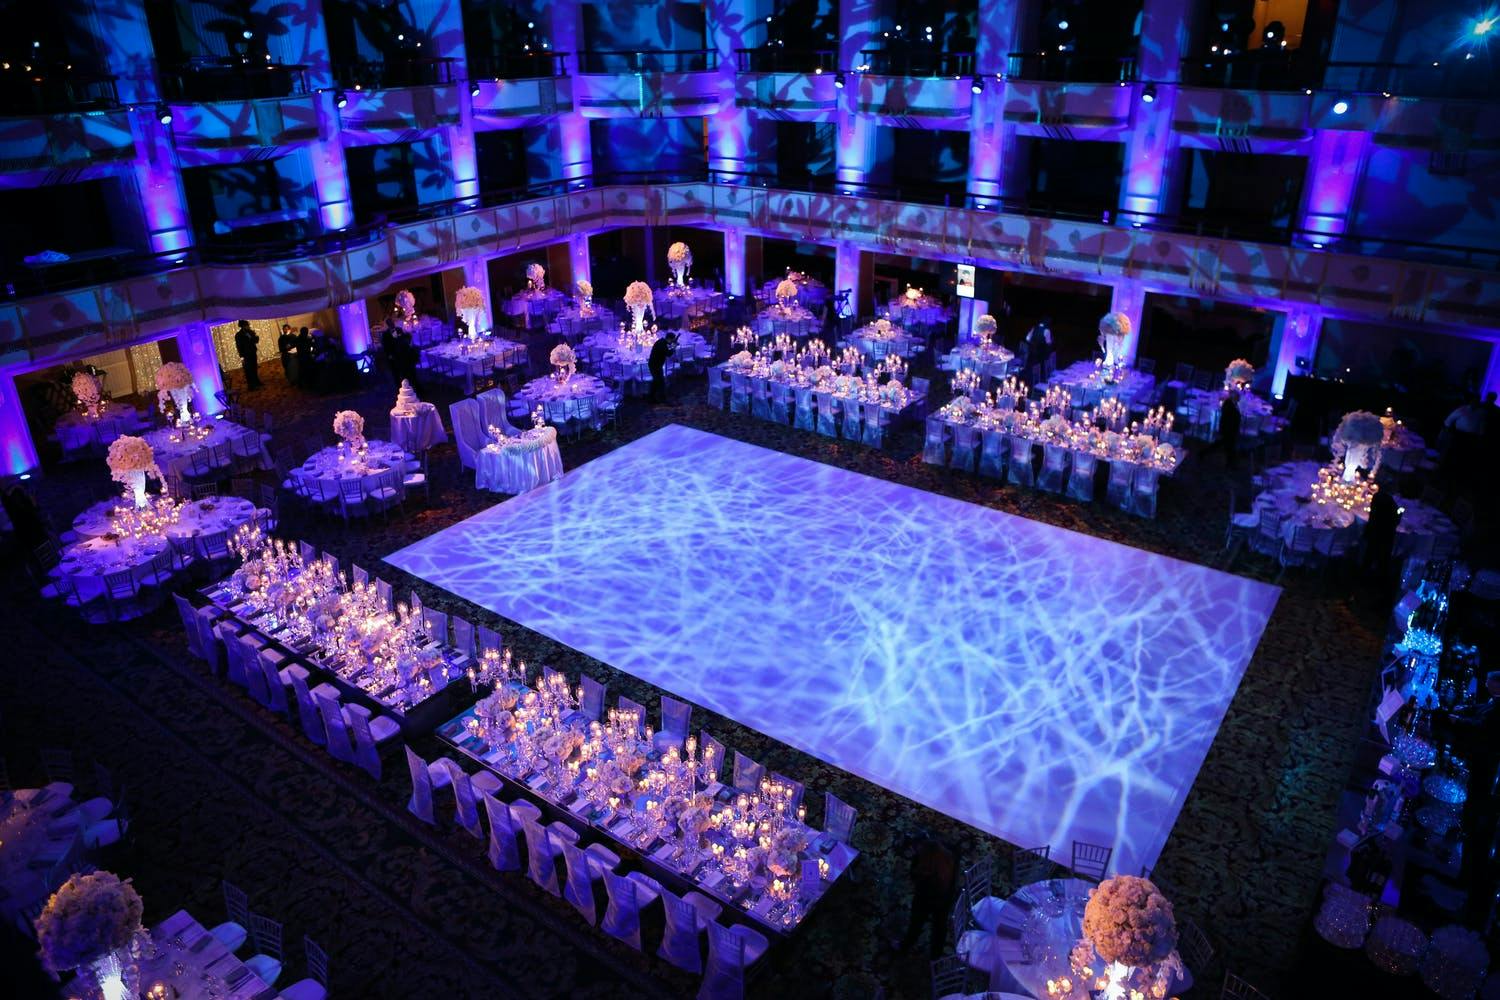 Traditional South Asian wedding at Waldorf Astoria New York with blue uplighting and dance floor that looks like the ocean | PartySlate